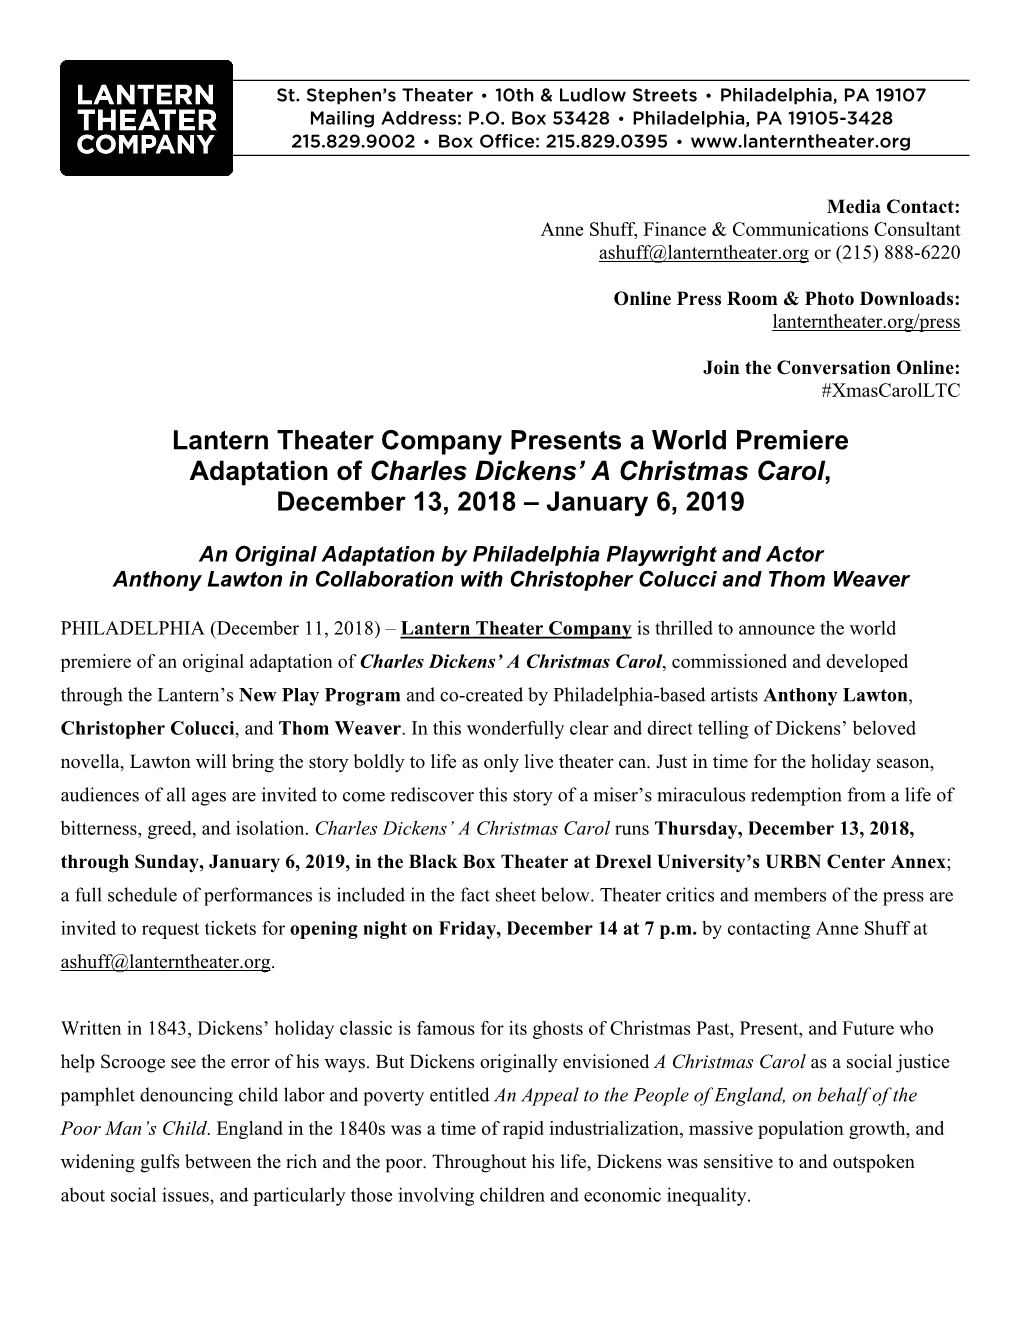 Lantern Theater Company Presents a World Premiere Adaptation of Charles Dickens’ a Christmas Carol, December 13, 2018 – January 6, 2019